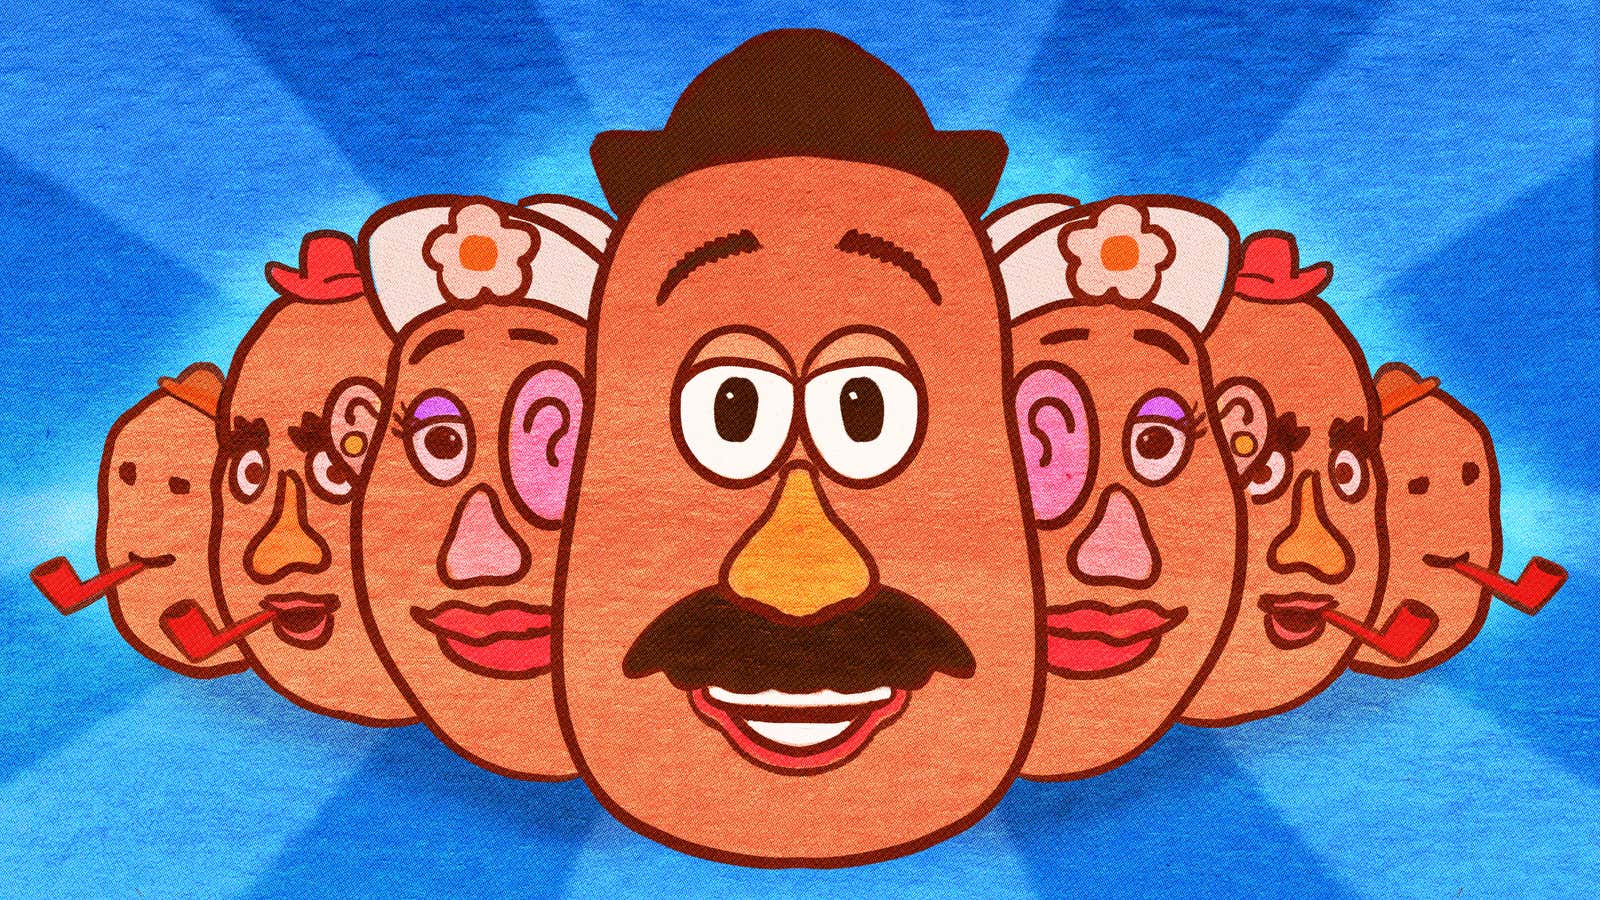 The spudly history of Mr. Potato Head